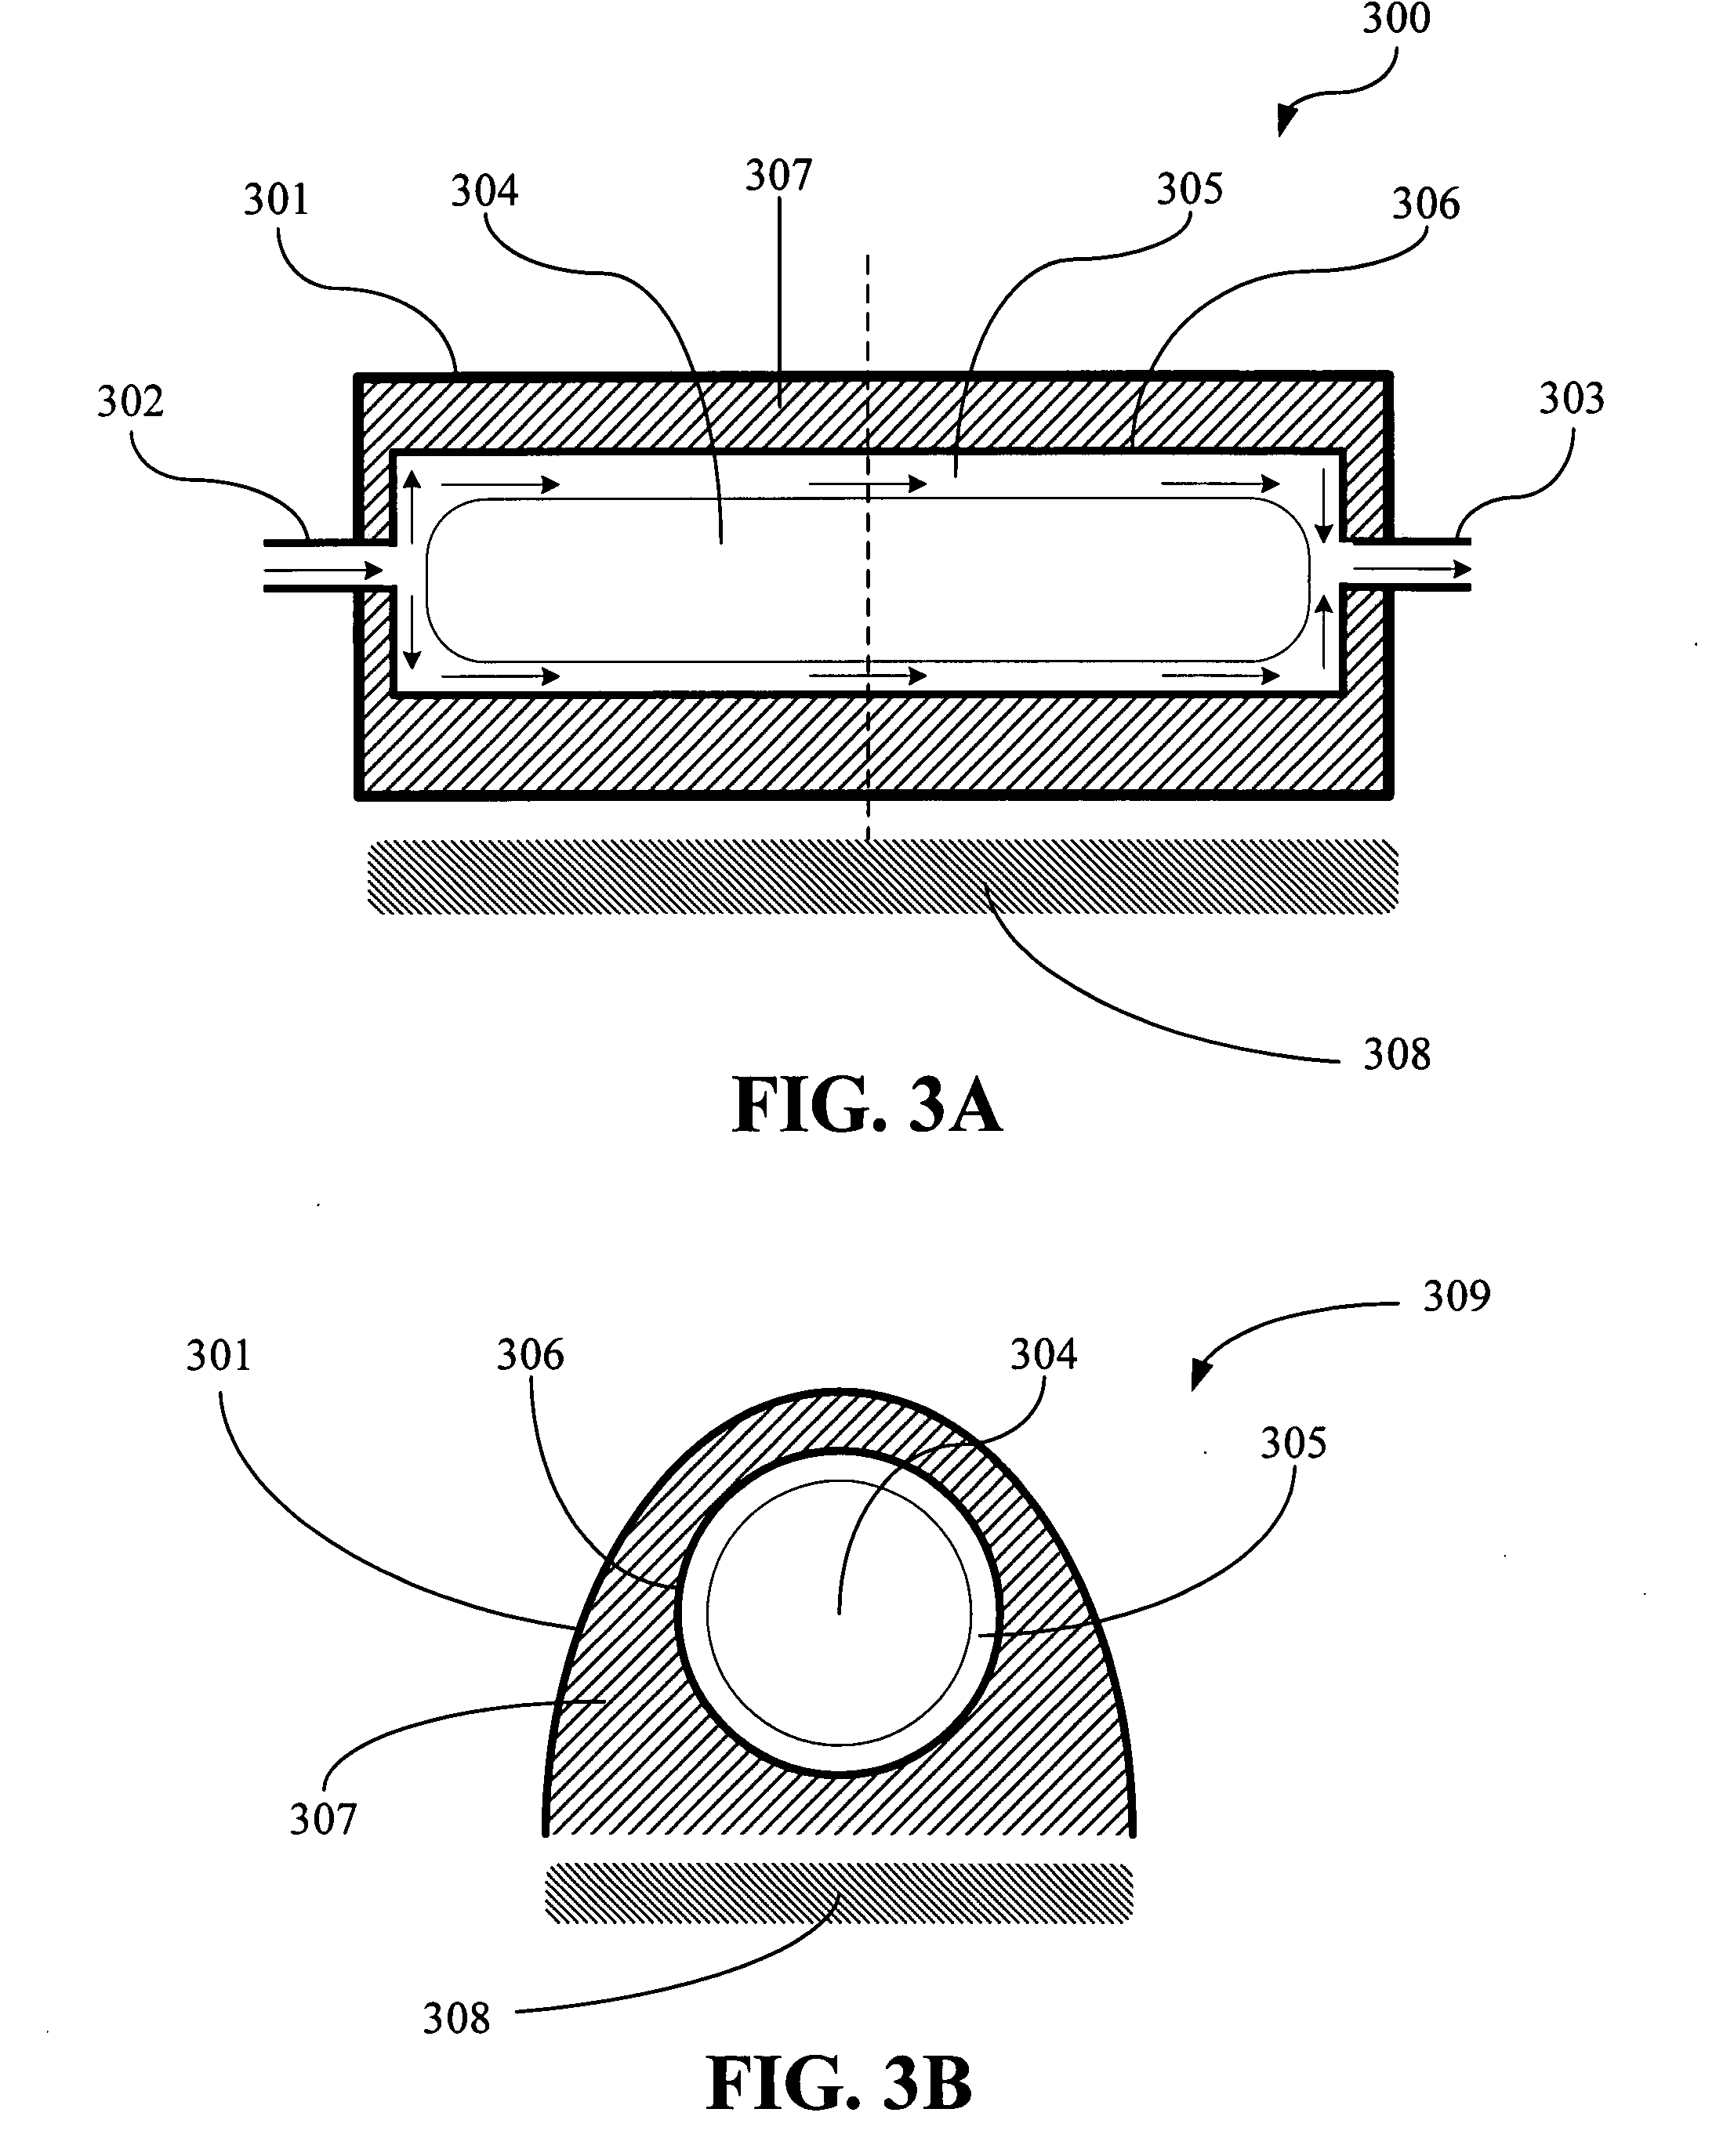 Method and apparatus for treating materials using electrodeless lamps